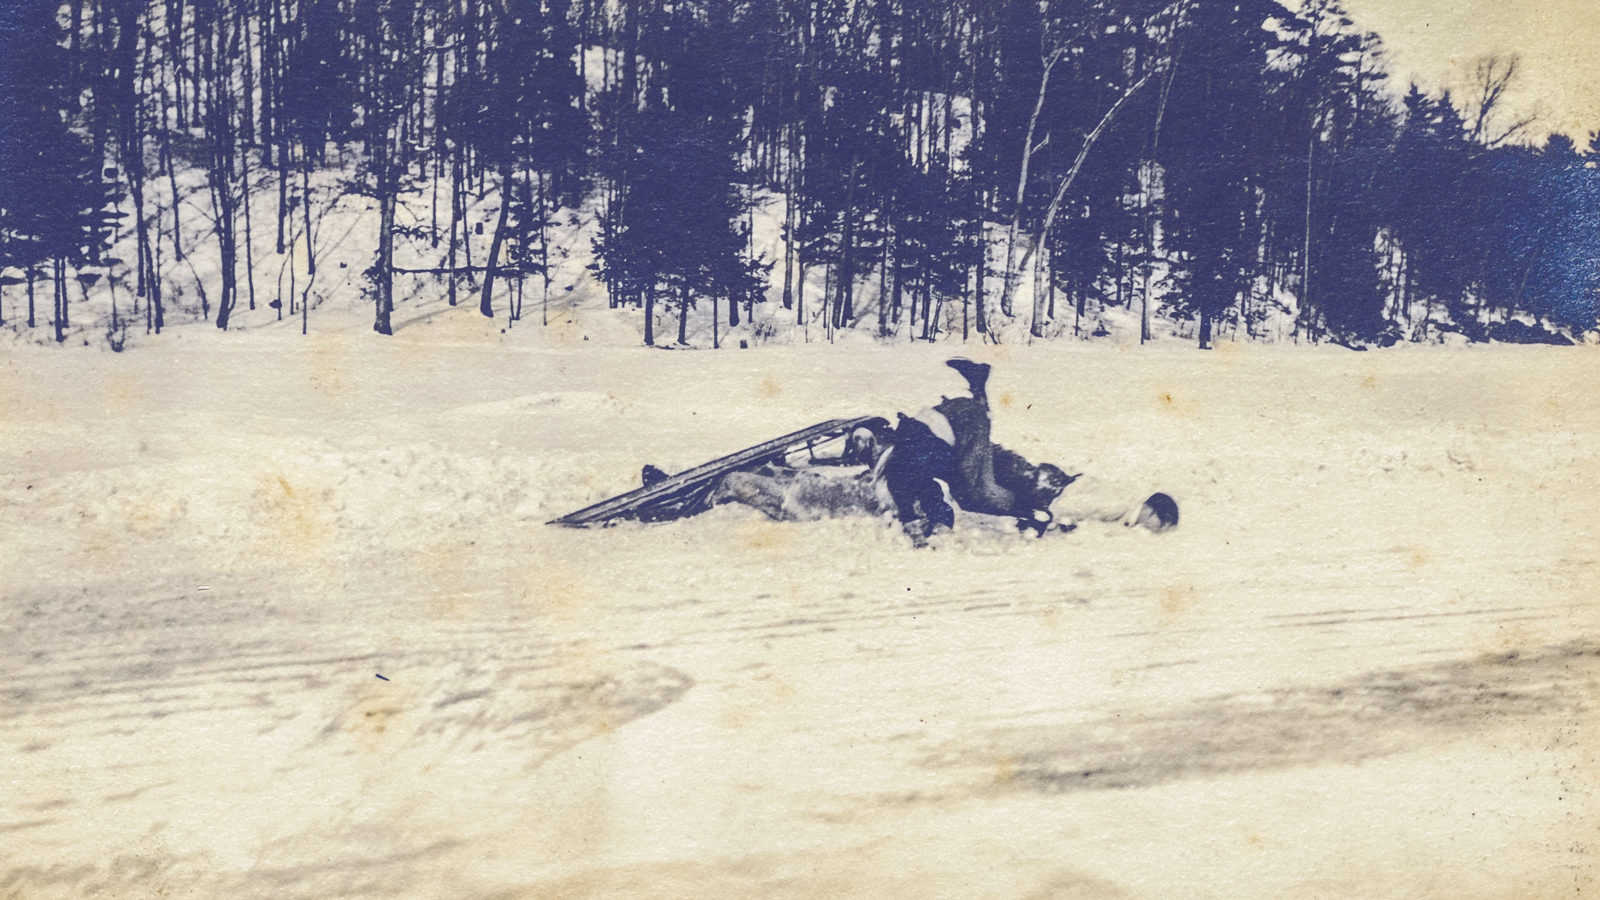 group of toboggan riders wipe out in the snow